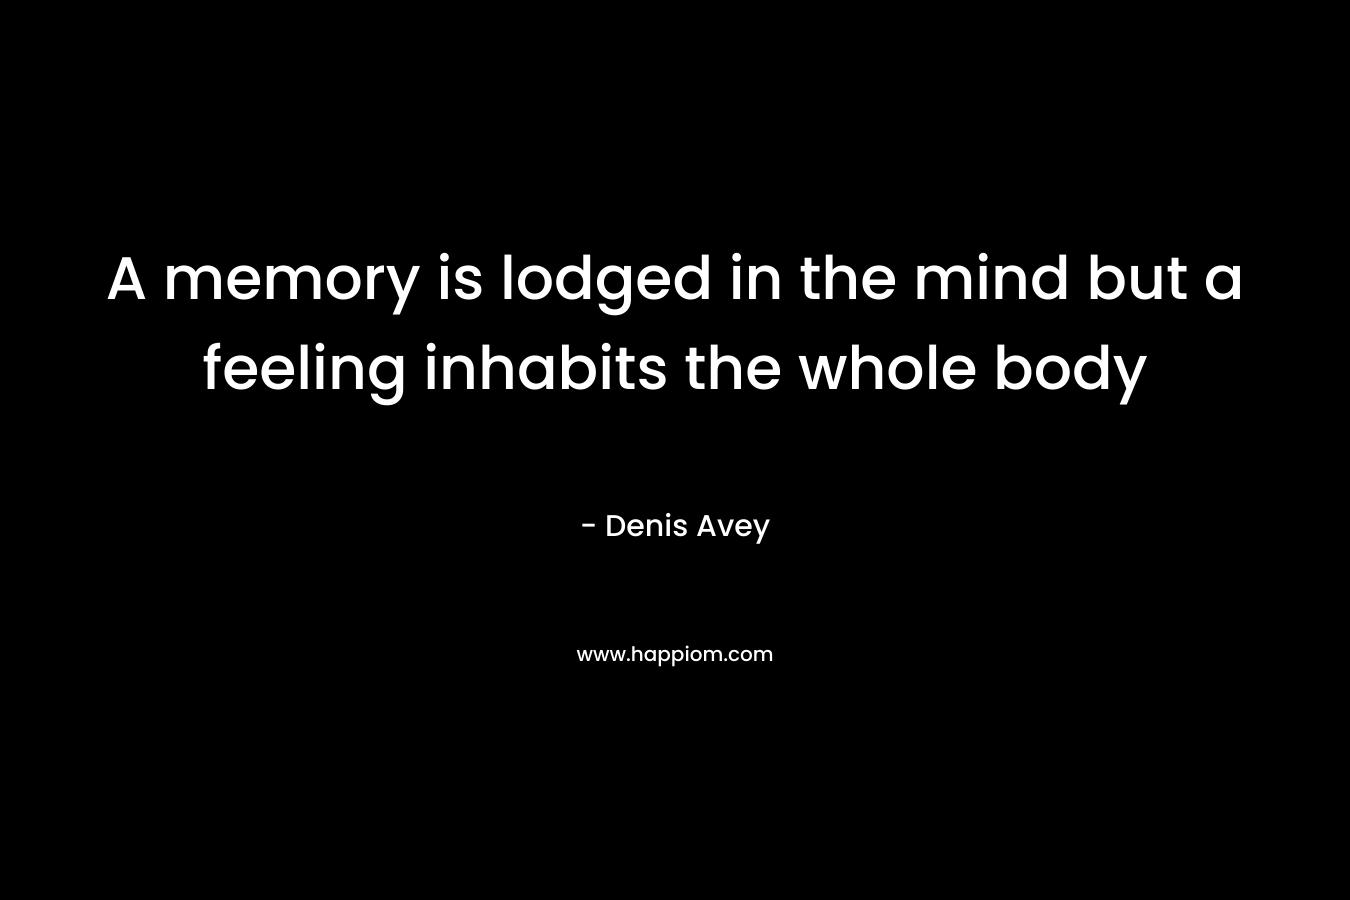 A memory is lodged in the mind but a feeling inhabits the whole body – Denis Avey